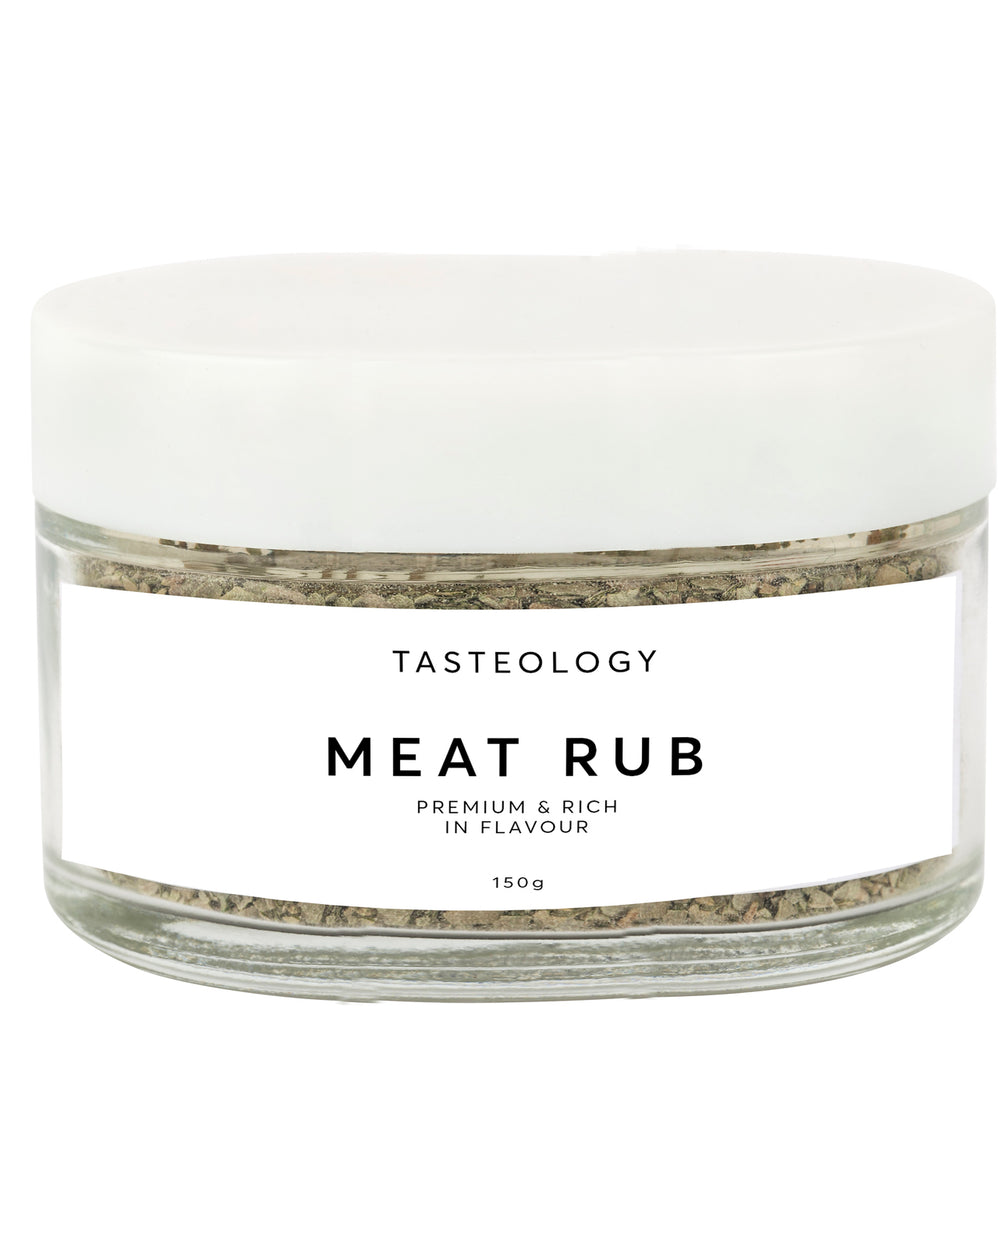 Meat Rub This TASTEOLOGY Meat Rub will add a powerful boost of flavour to any meat or poultry. Rub directly onto your meat or mix with olive oil for a marinade.